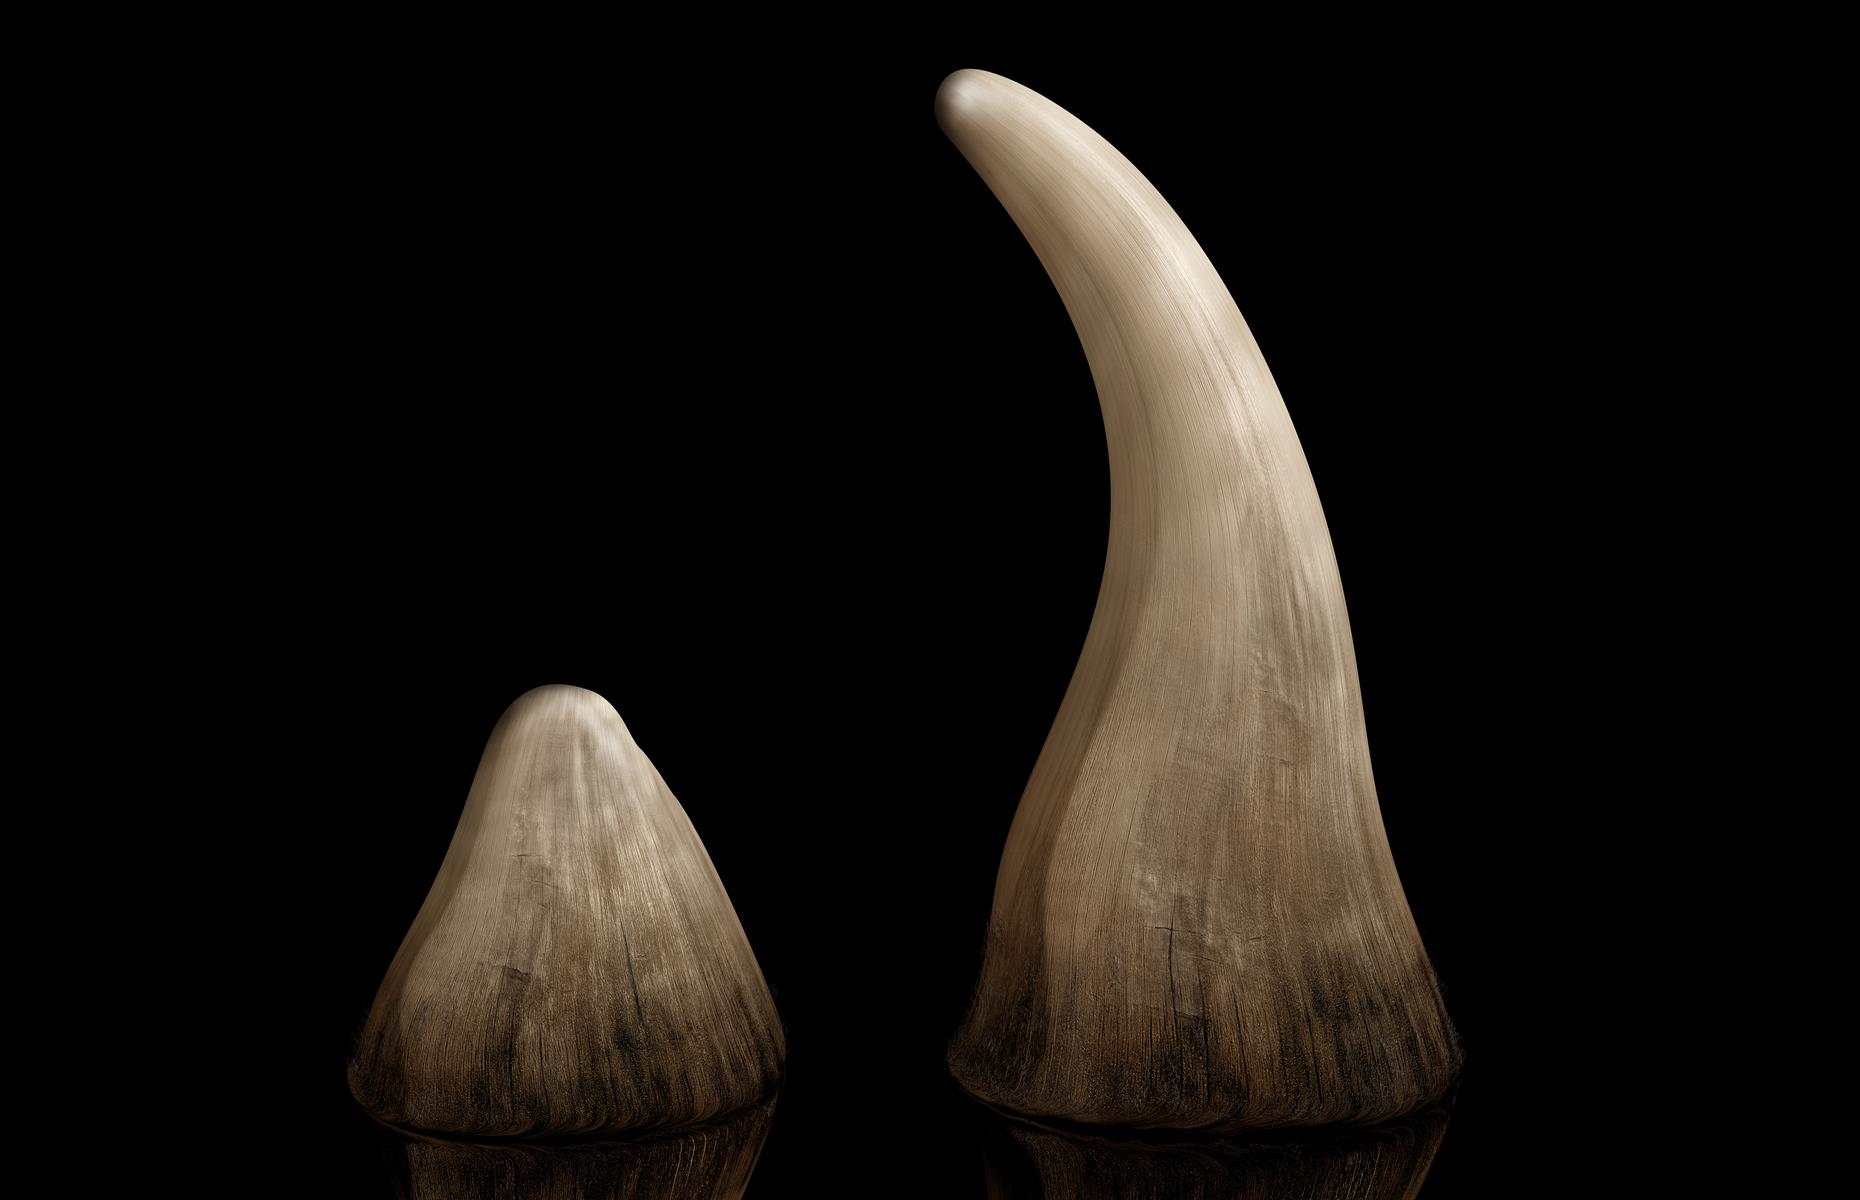 Rhino horn stockpiles are the subject of debate in Africa